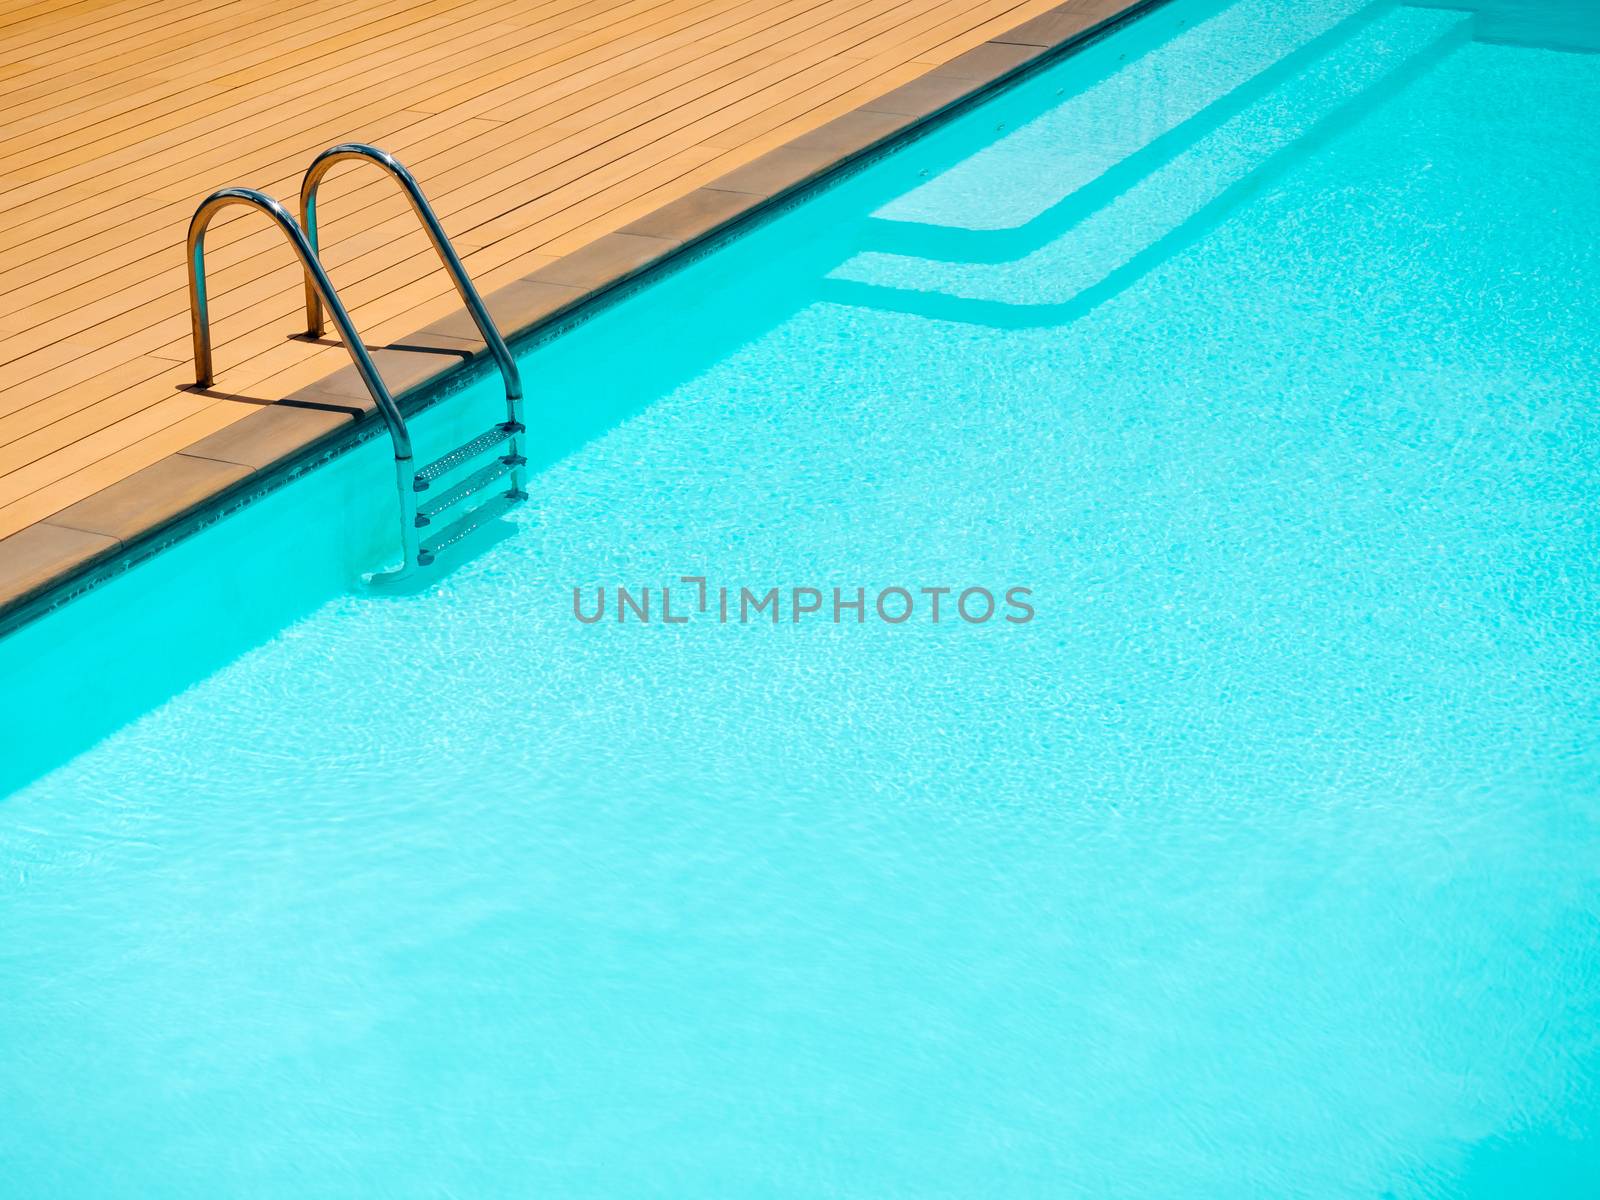 Outdoor swimming pool background minimal style. Grab bars ladder in the blue swimming pool with copy space.